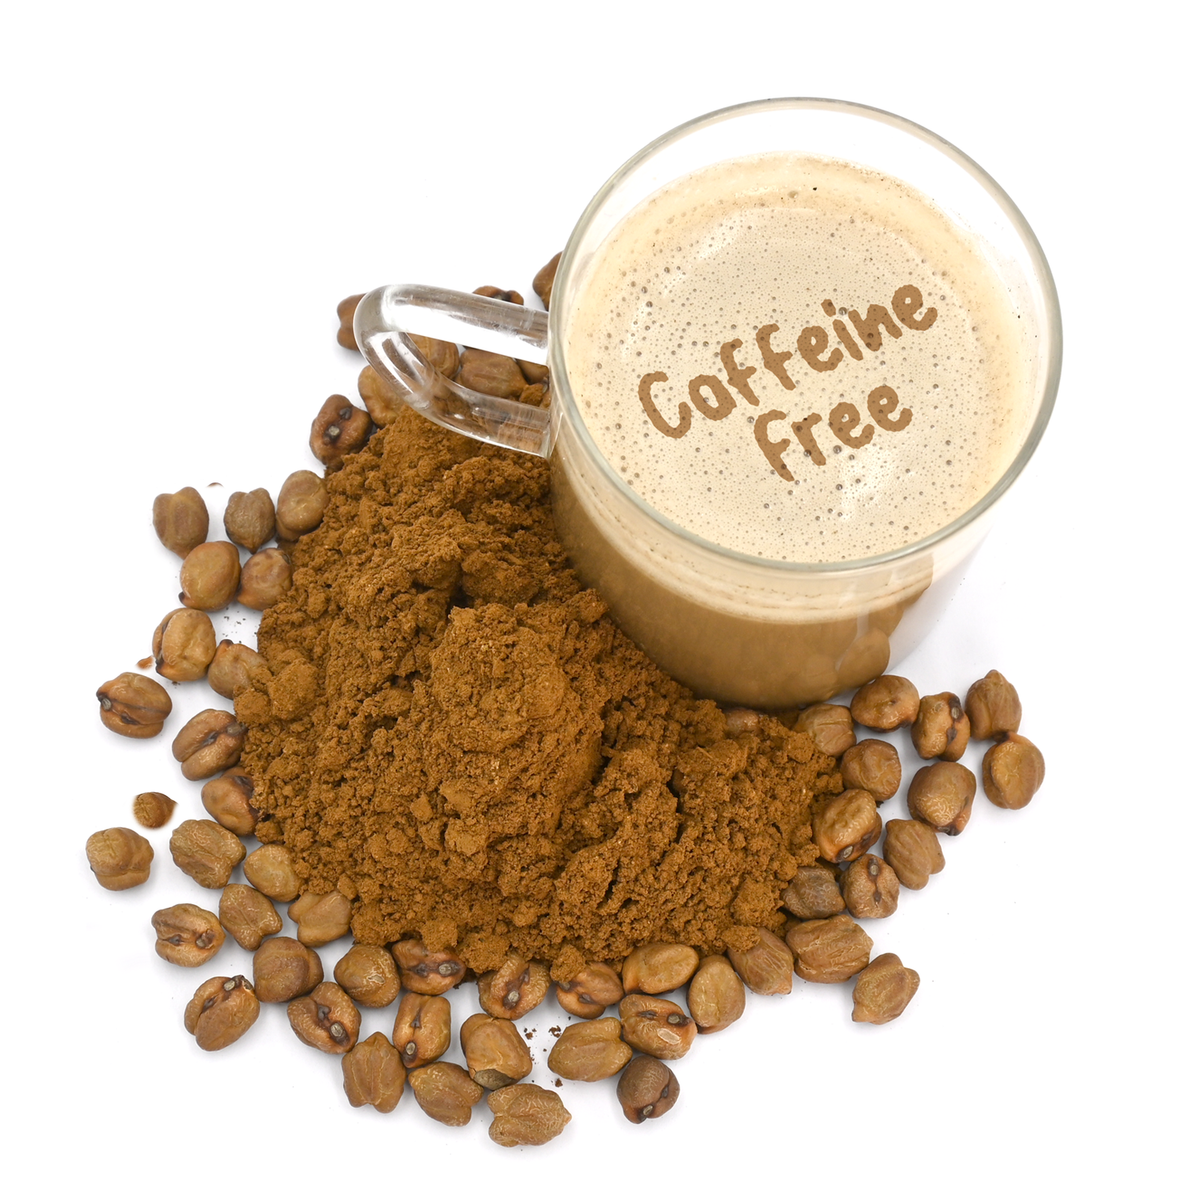 No Coffee Powder 100g & 200g -  Prepared using Organic Chickpeas/Kabuli Chana - Non Stimulant Caffeine Free & Dairy-Free Fine Powder without Sugar, Artificial Flavours/ Colors or Preservatives